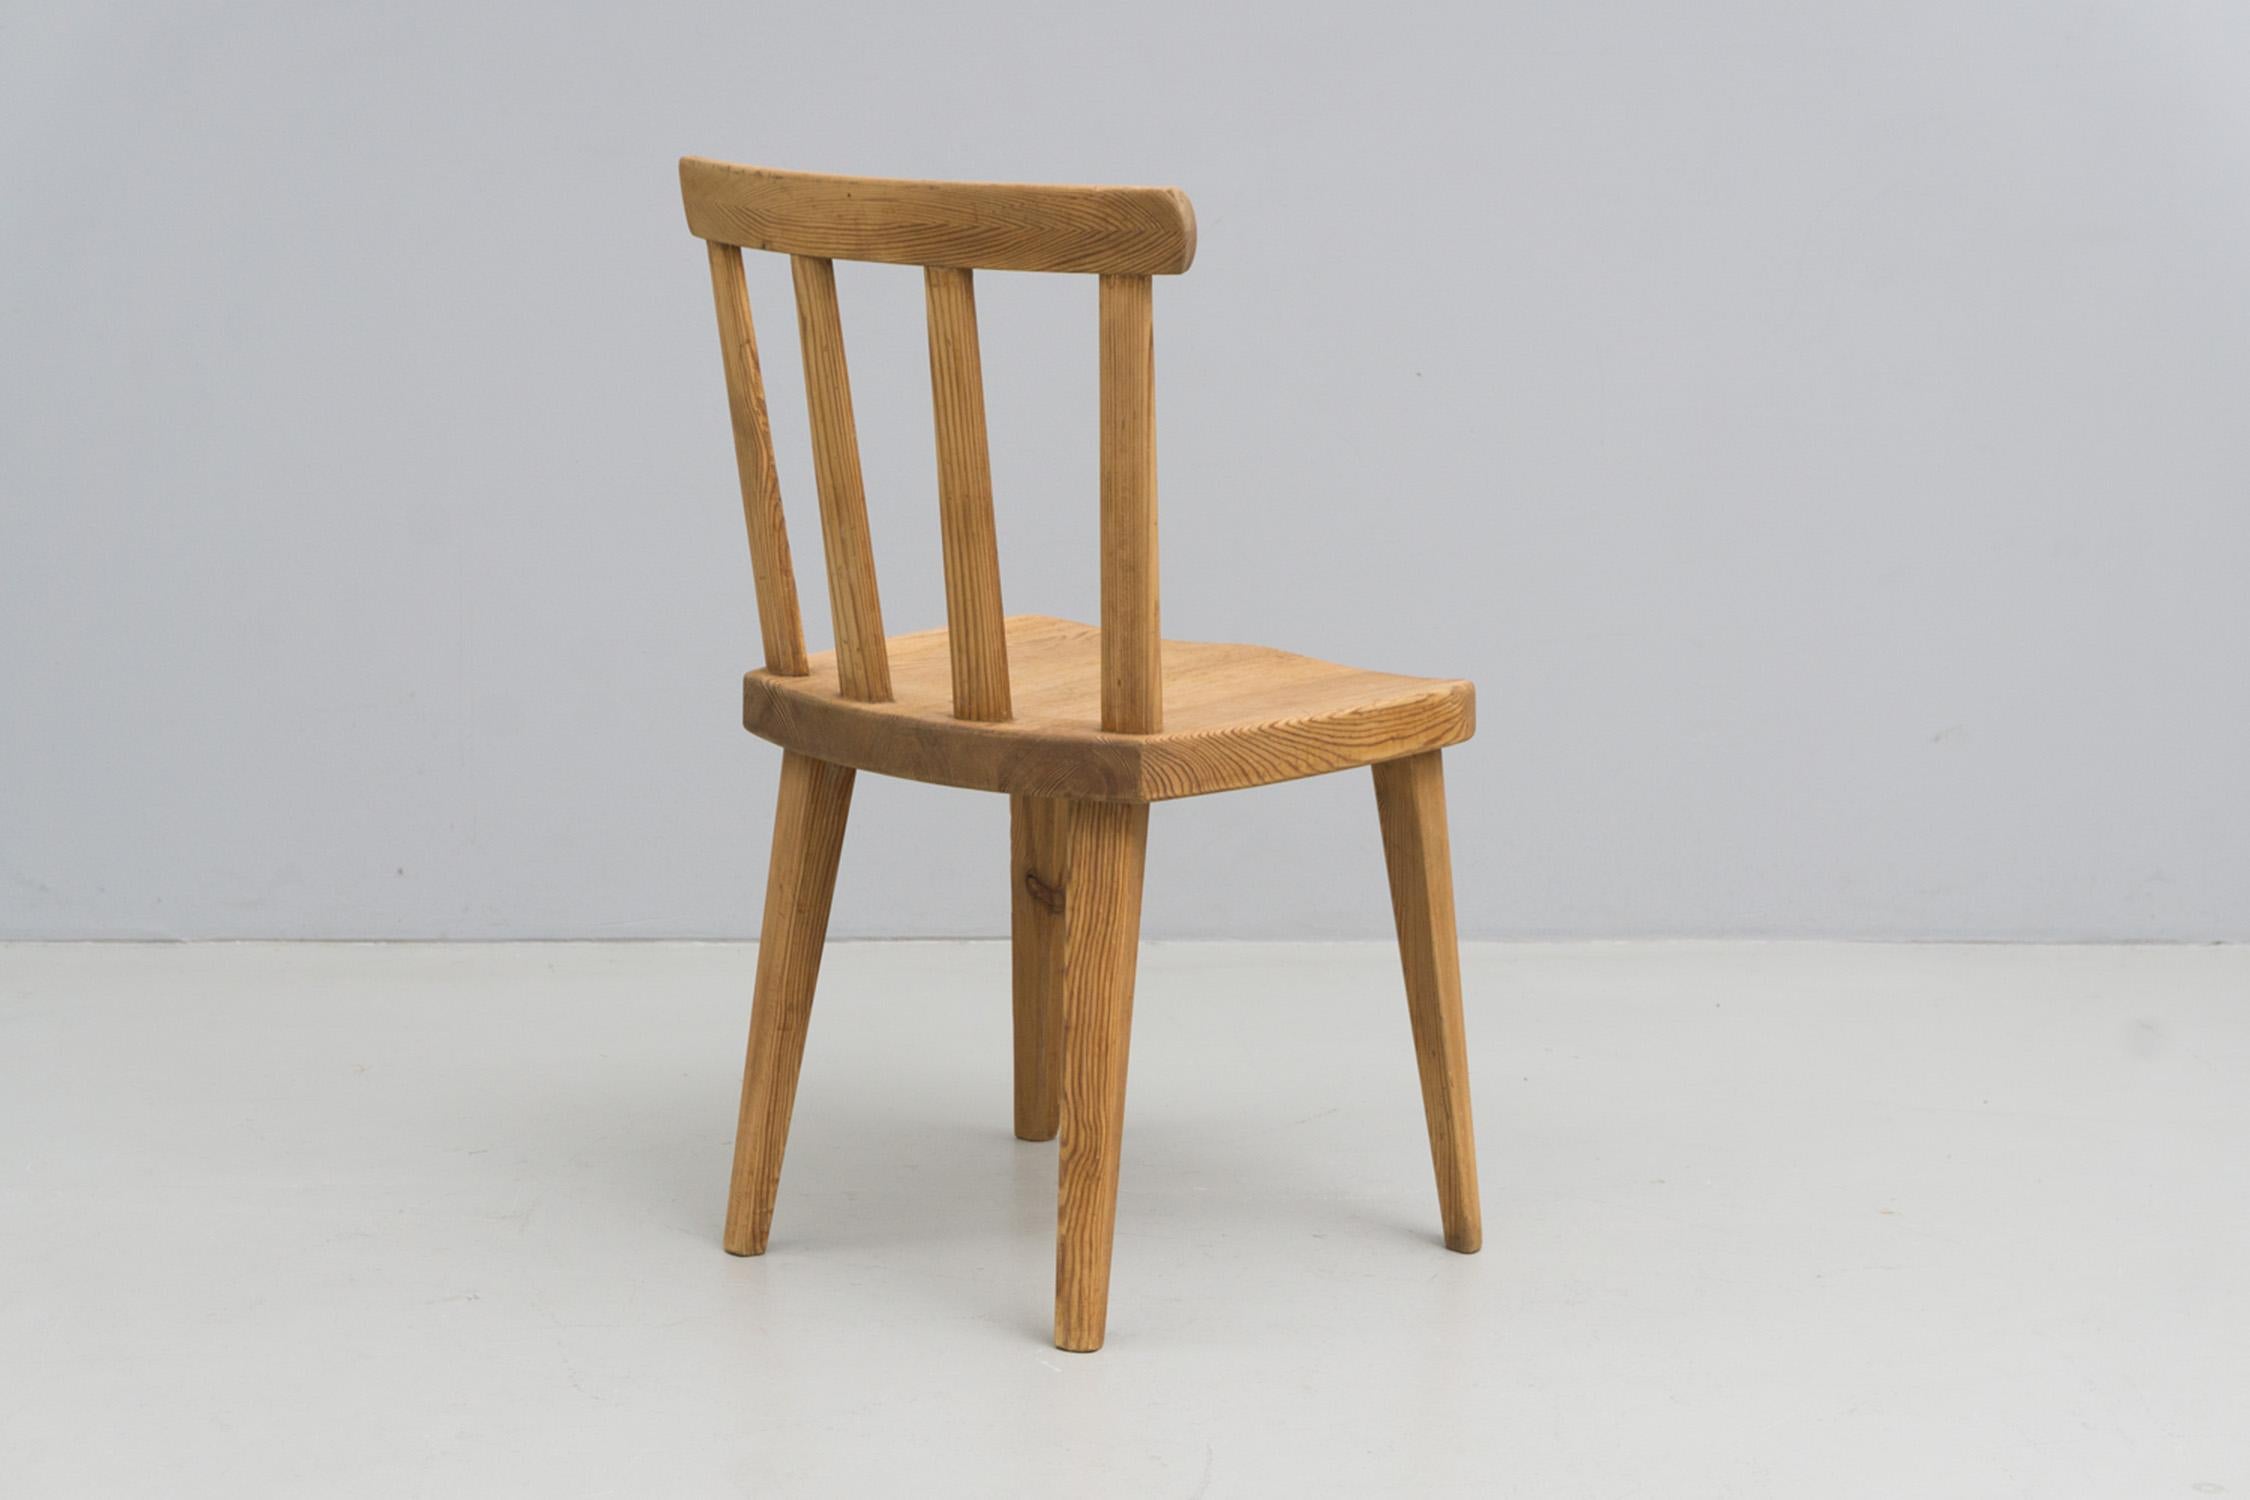 Set of Swedish Pine Wood Chairs, 'Uto' by Axel Einar Hjorth, 1930 For Sale 4